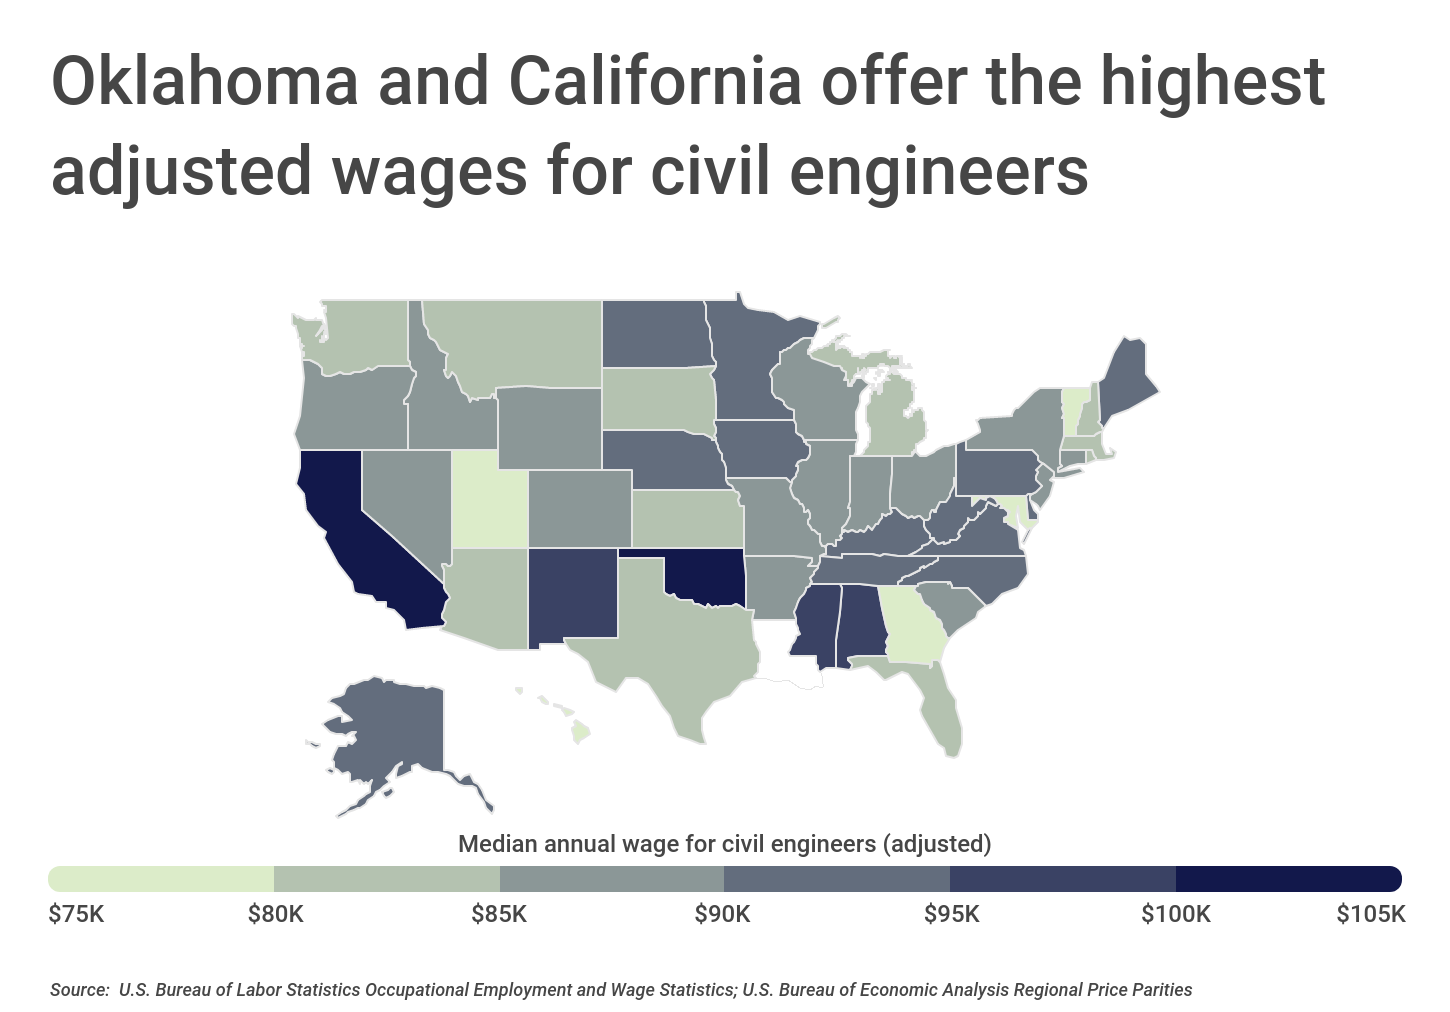 Chart3_OK and CA offer the highest adjusted wages for civil engineers